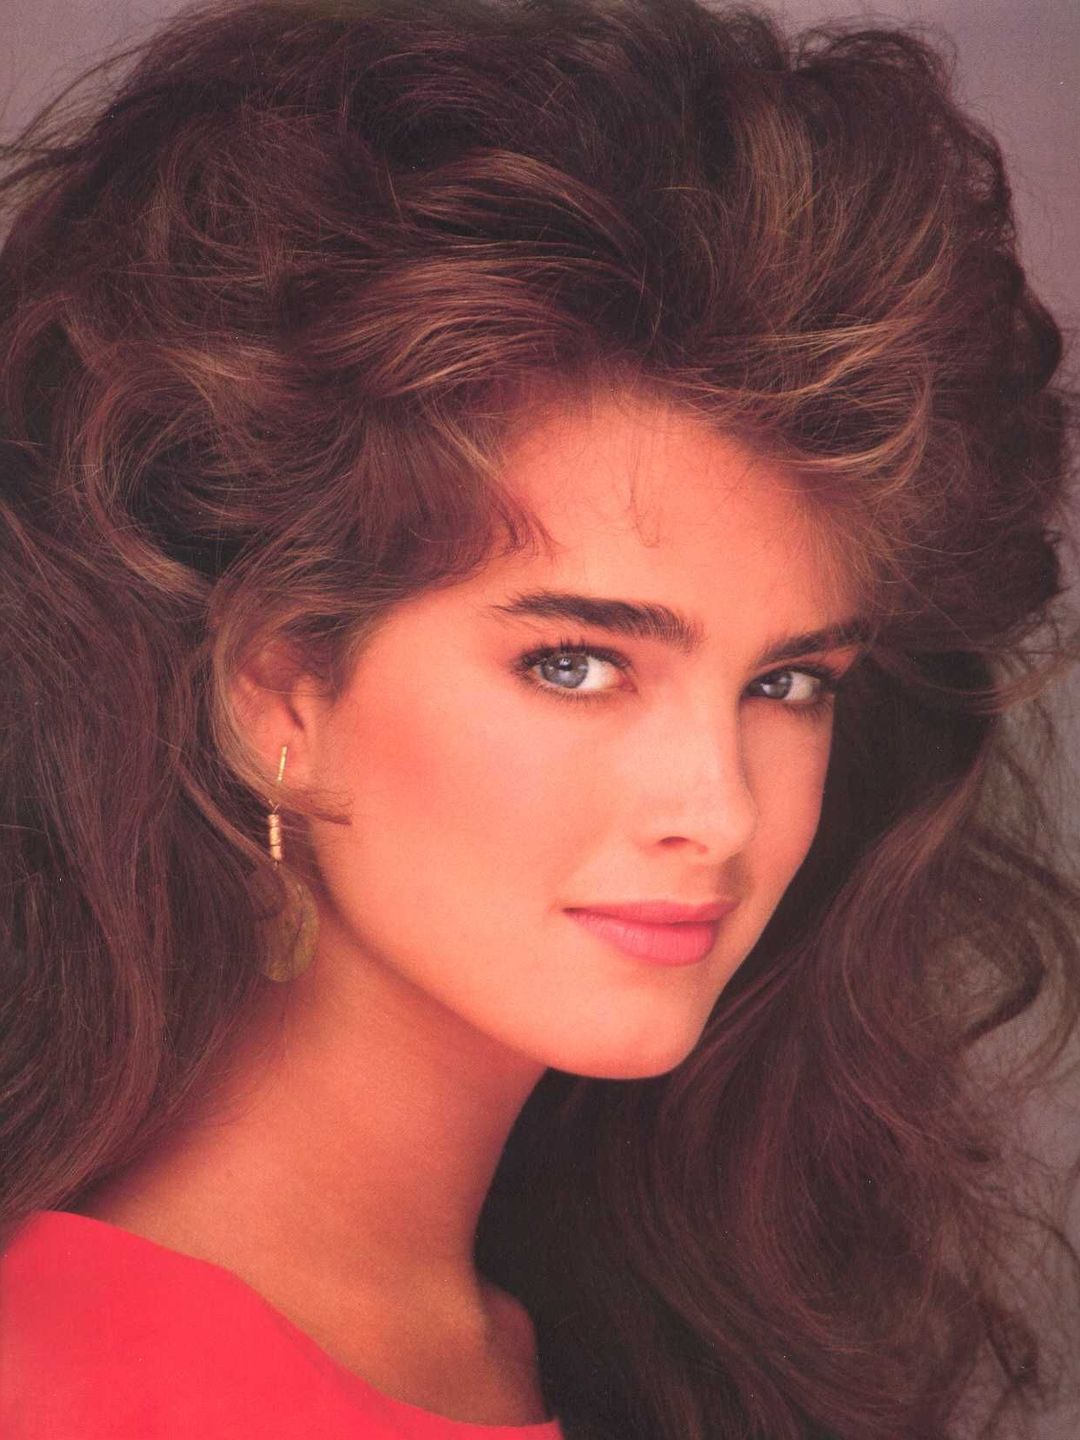 Brooke Shields young age